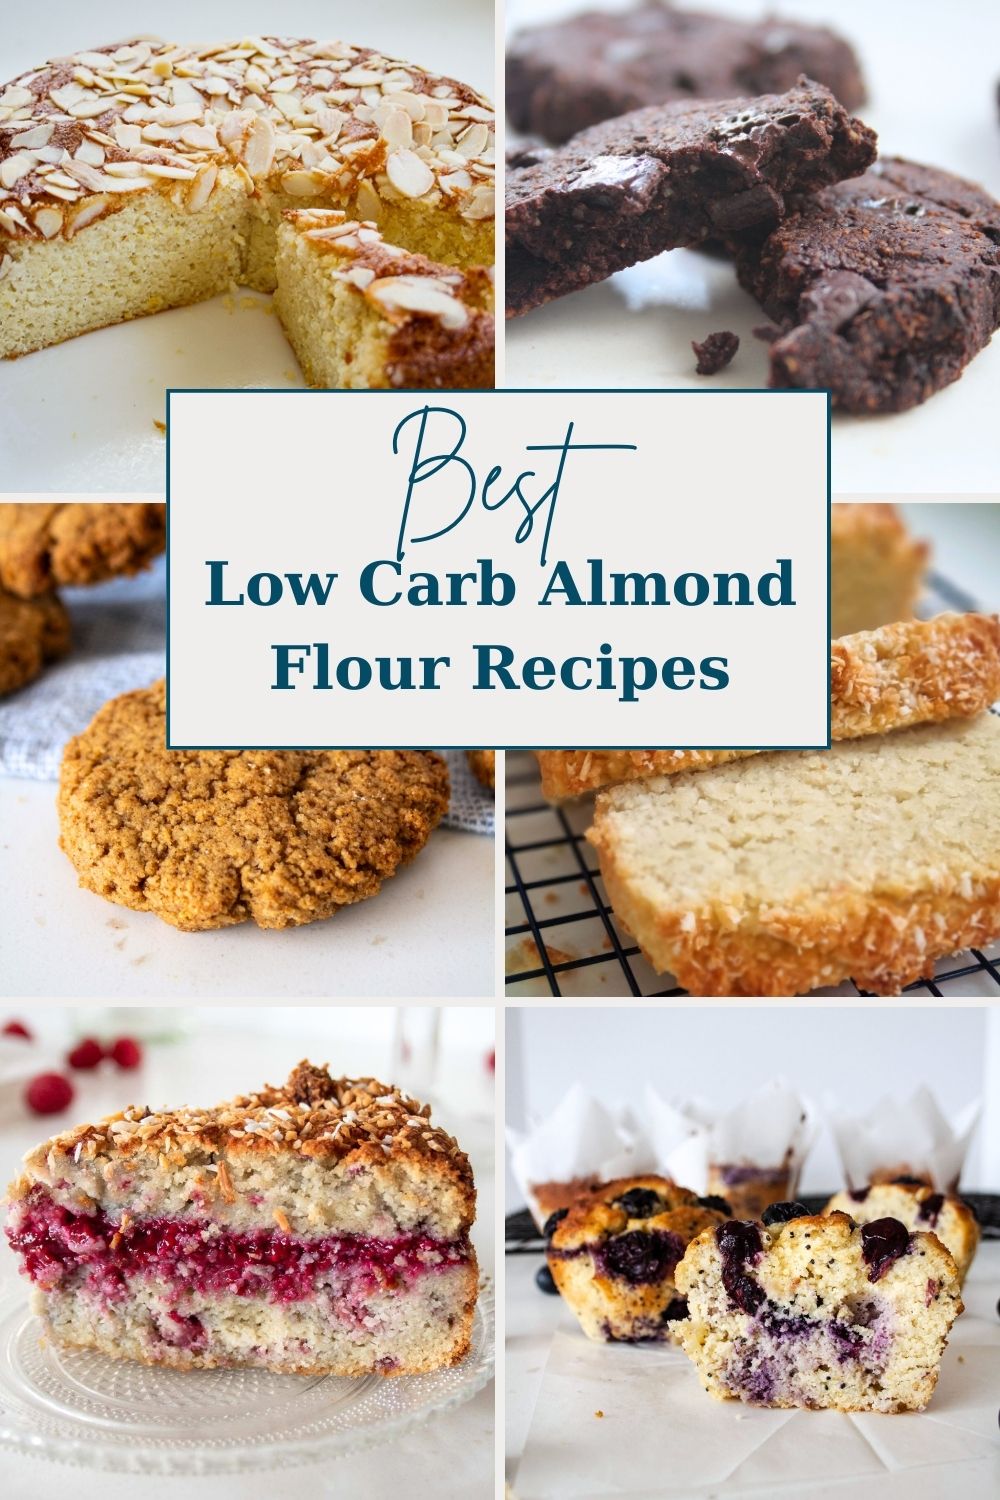 Best low carb almond recipes showing a selection of almond flour recipes